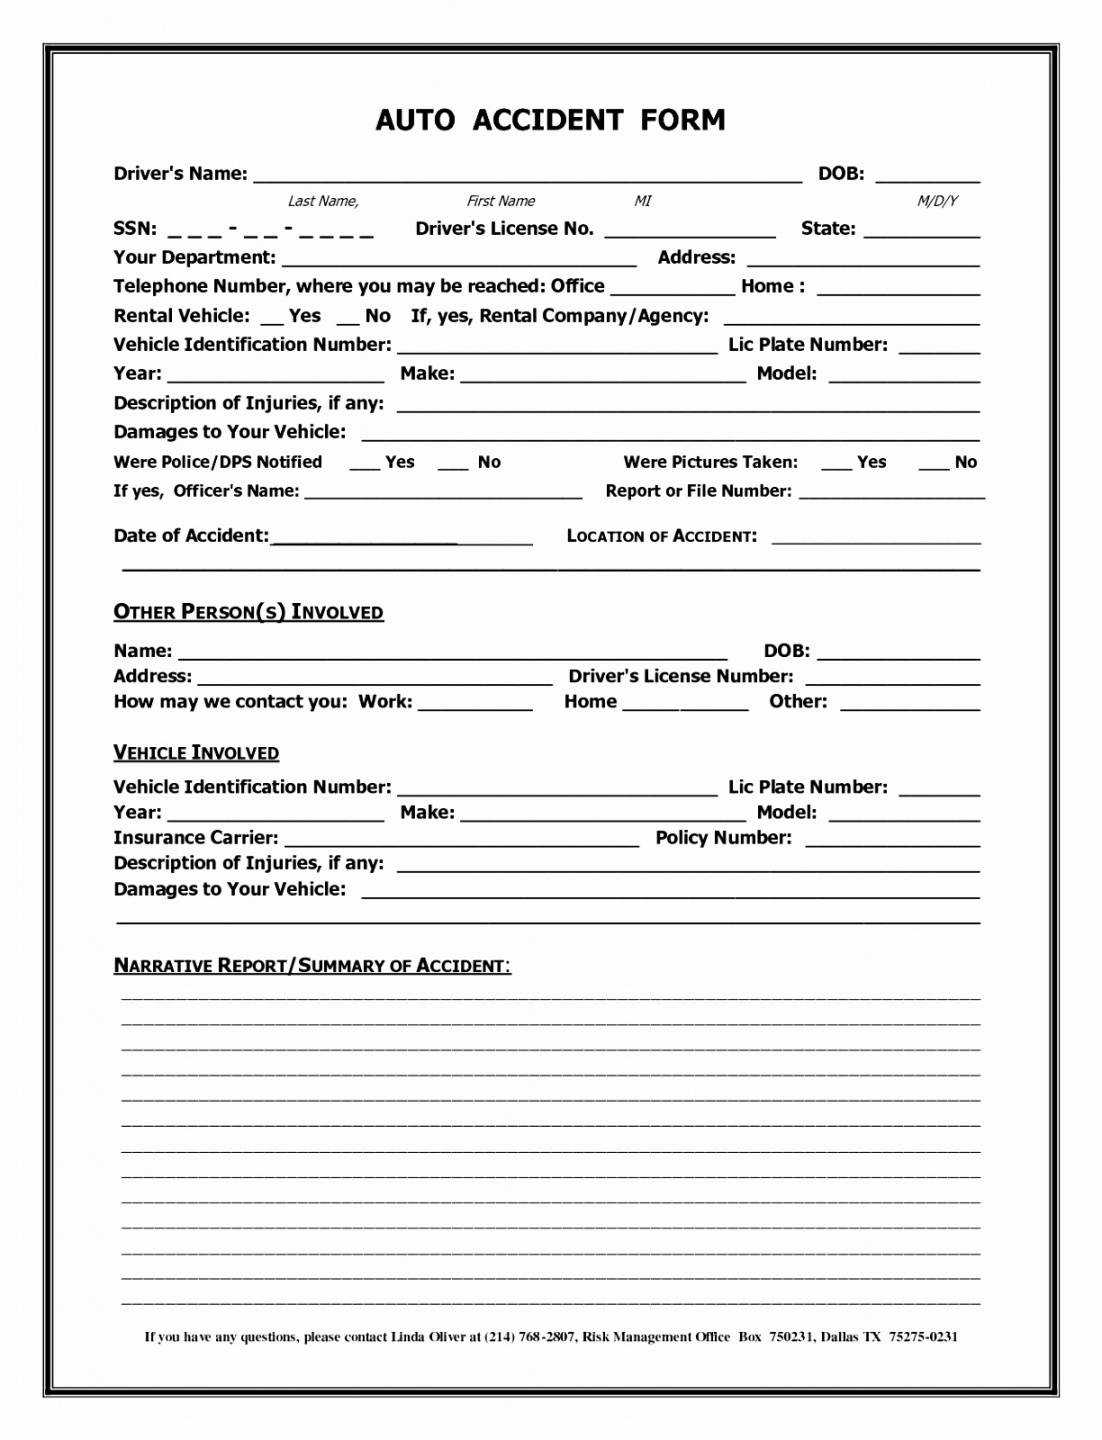 004 Template Ideas Accident Reporting Form Report Uk Of Regarding Vehicle Accident Report Form Template